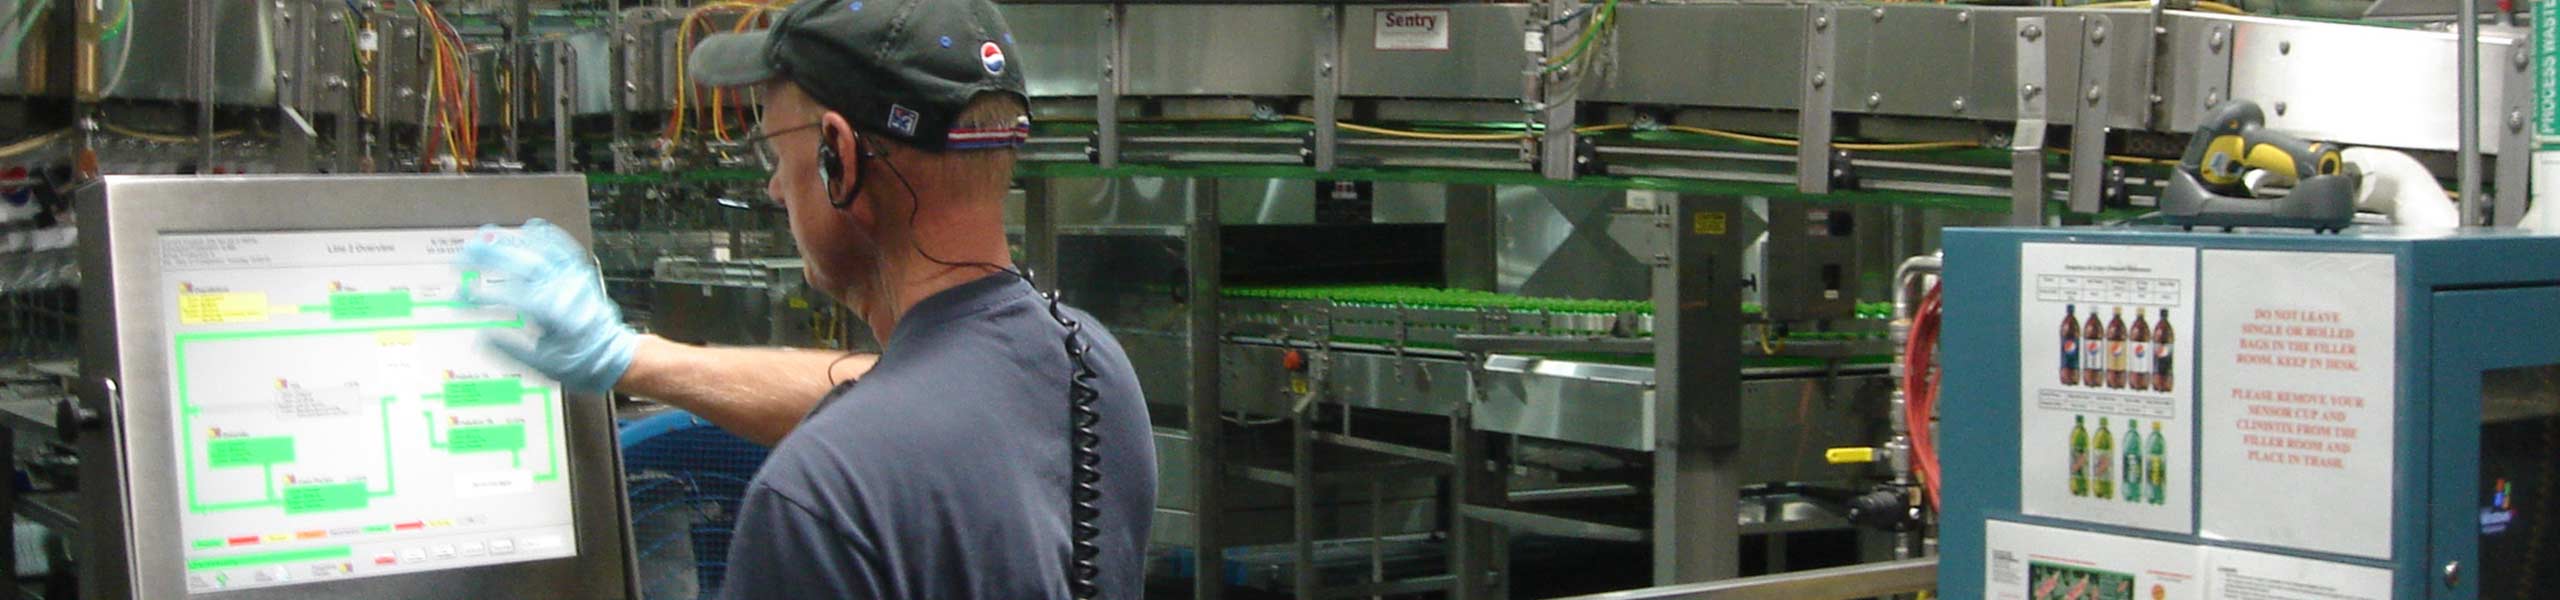 Male worker on the computer on the manufacturing floor using facility management software.